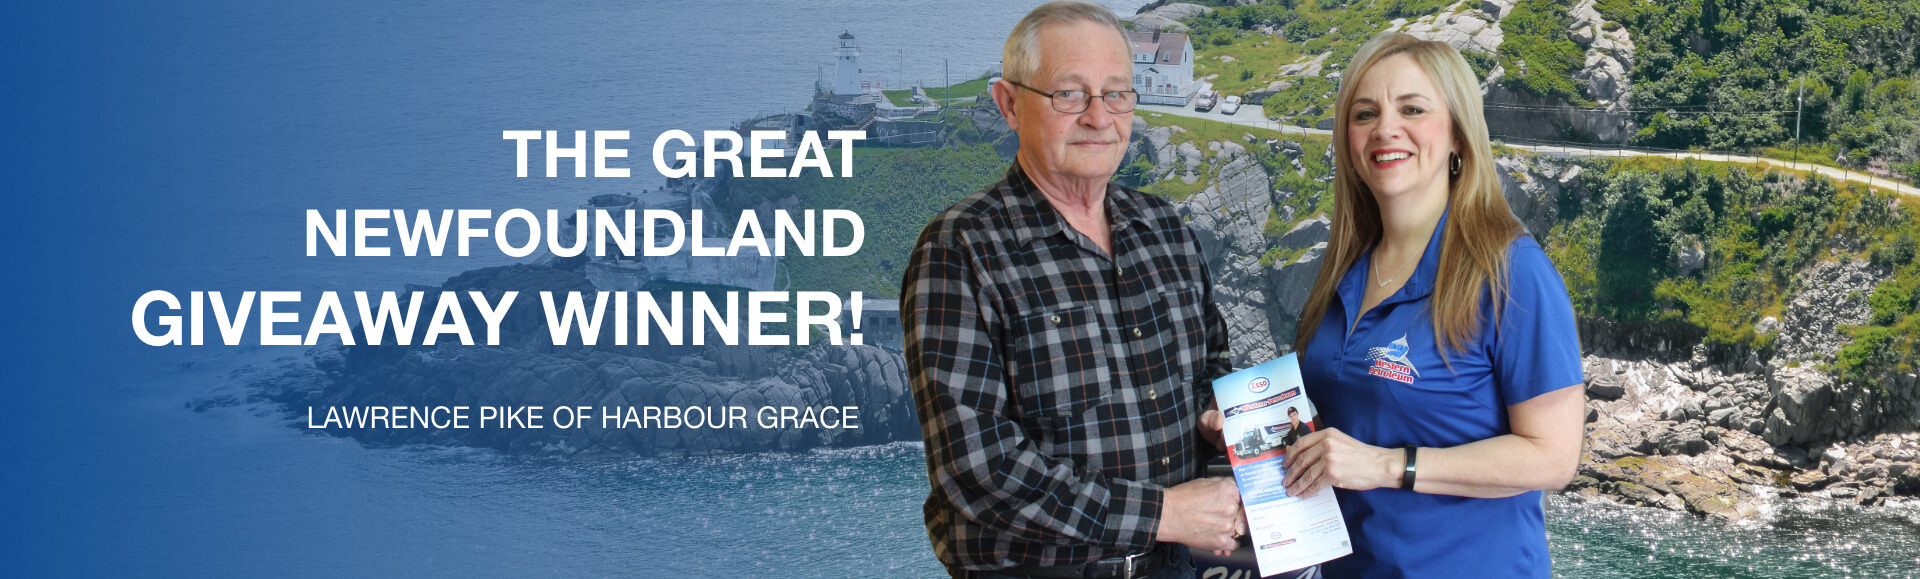 The Great Newfoundland Giveaway